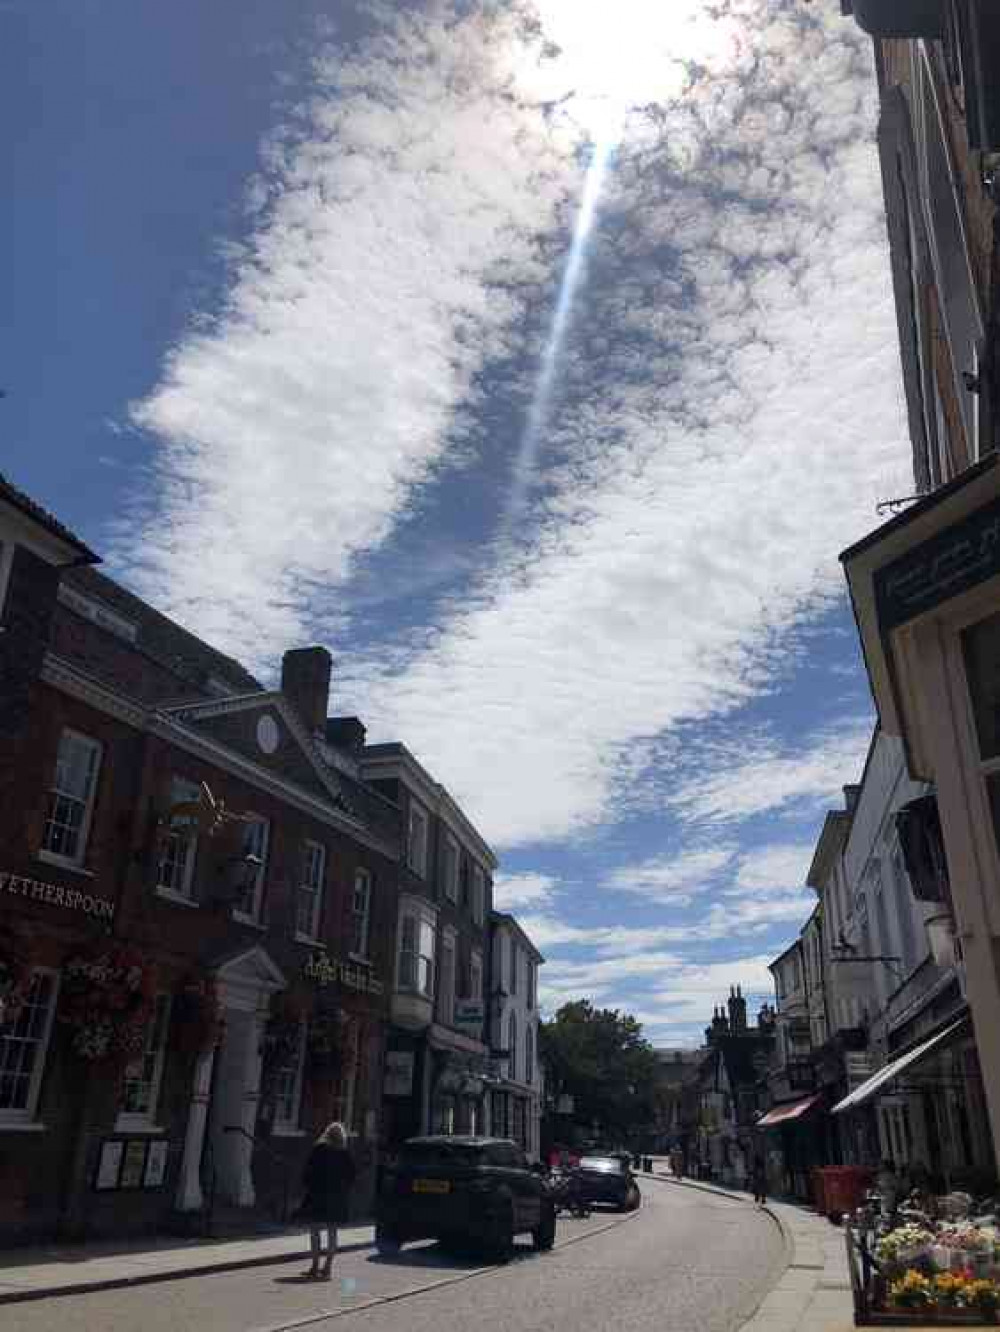 Temperatures are expected to reach 34C in Hitchin. CREDIT RMGF